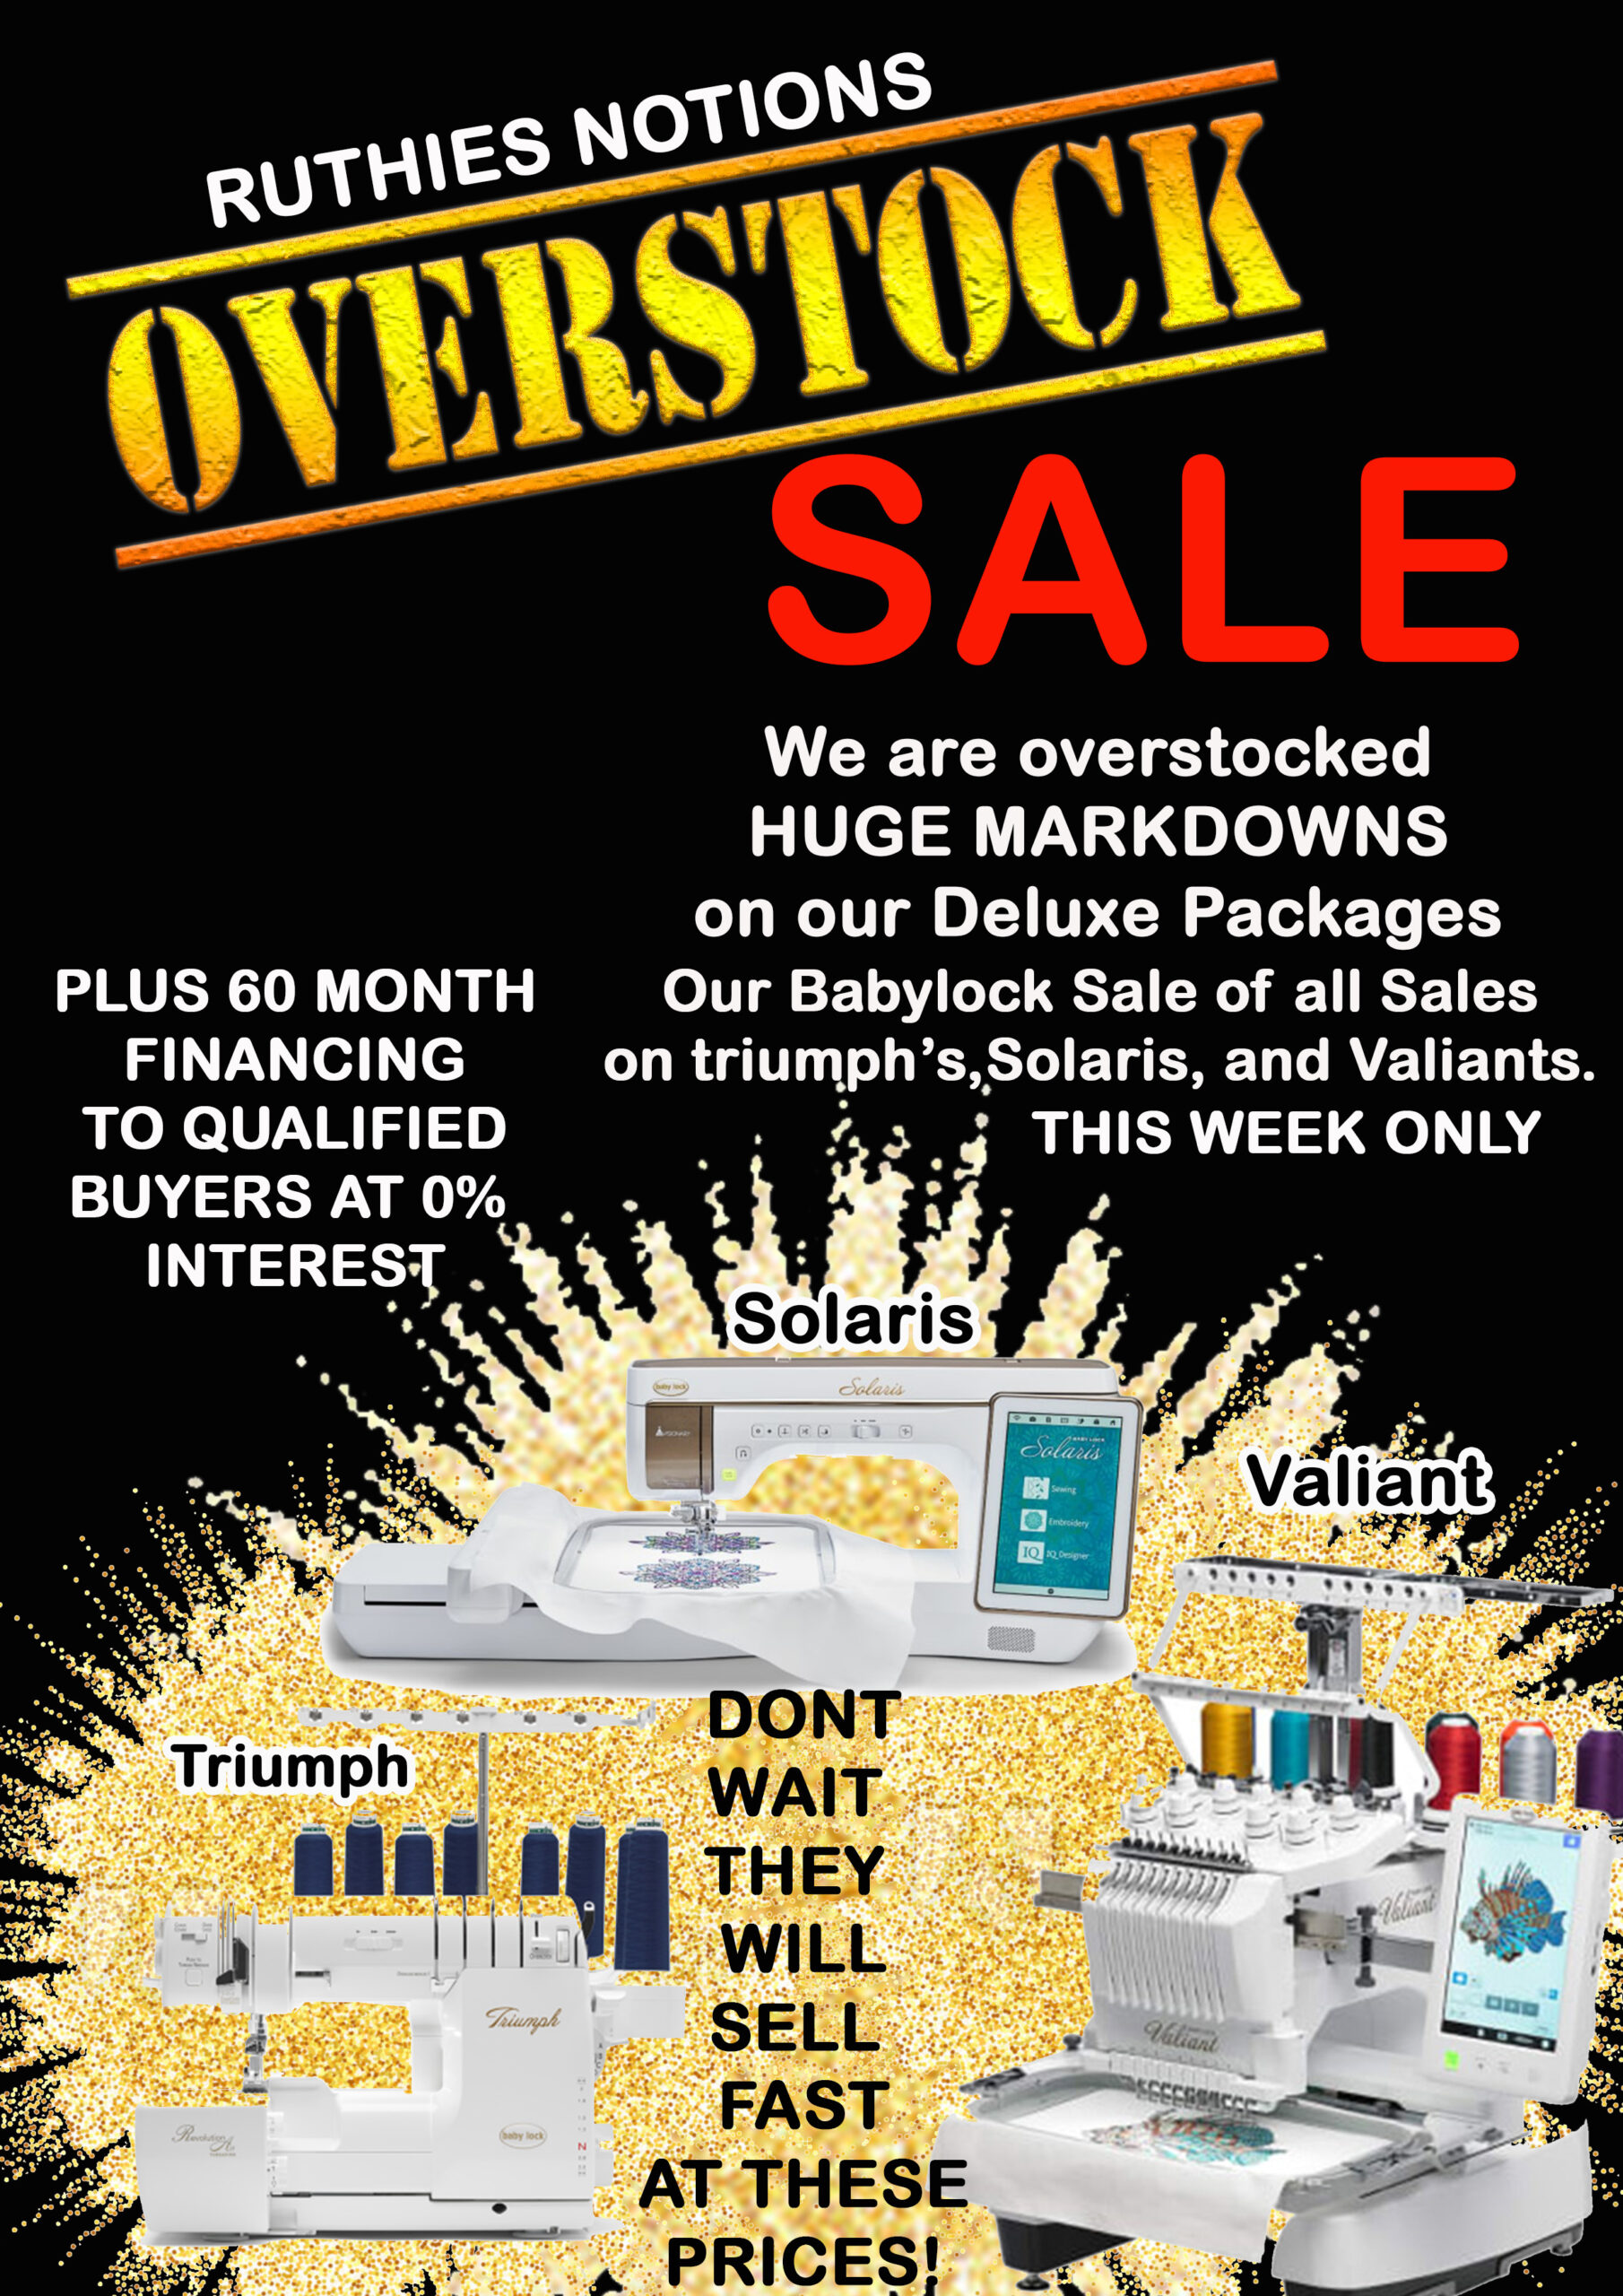 Overstock sale on BabyLock and Brother Machines